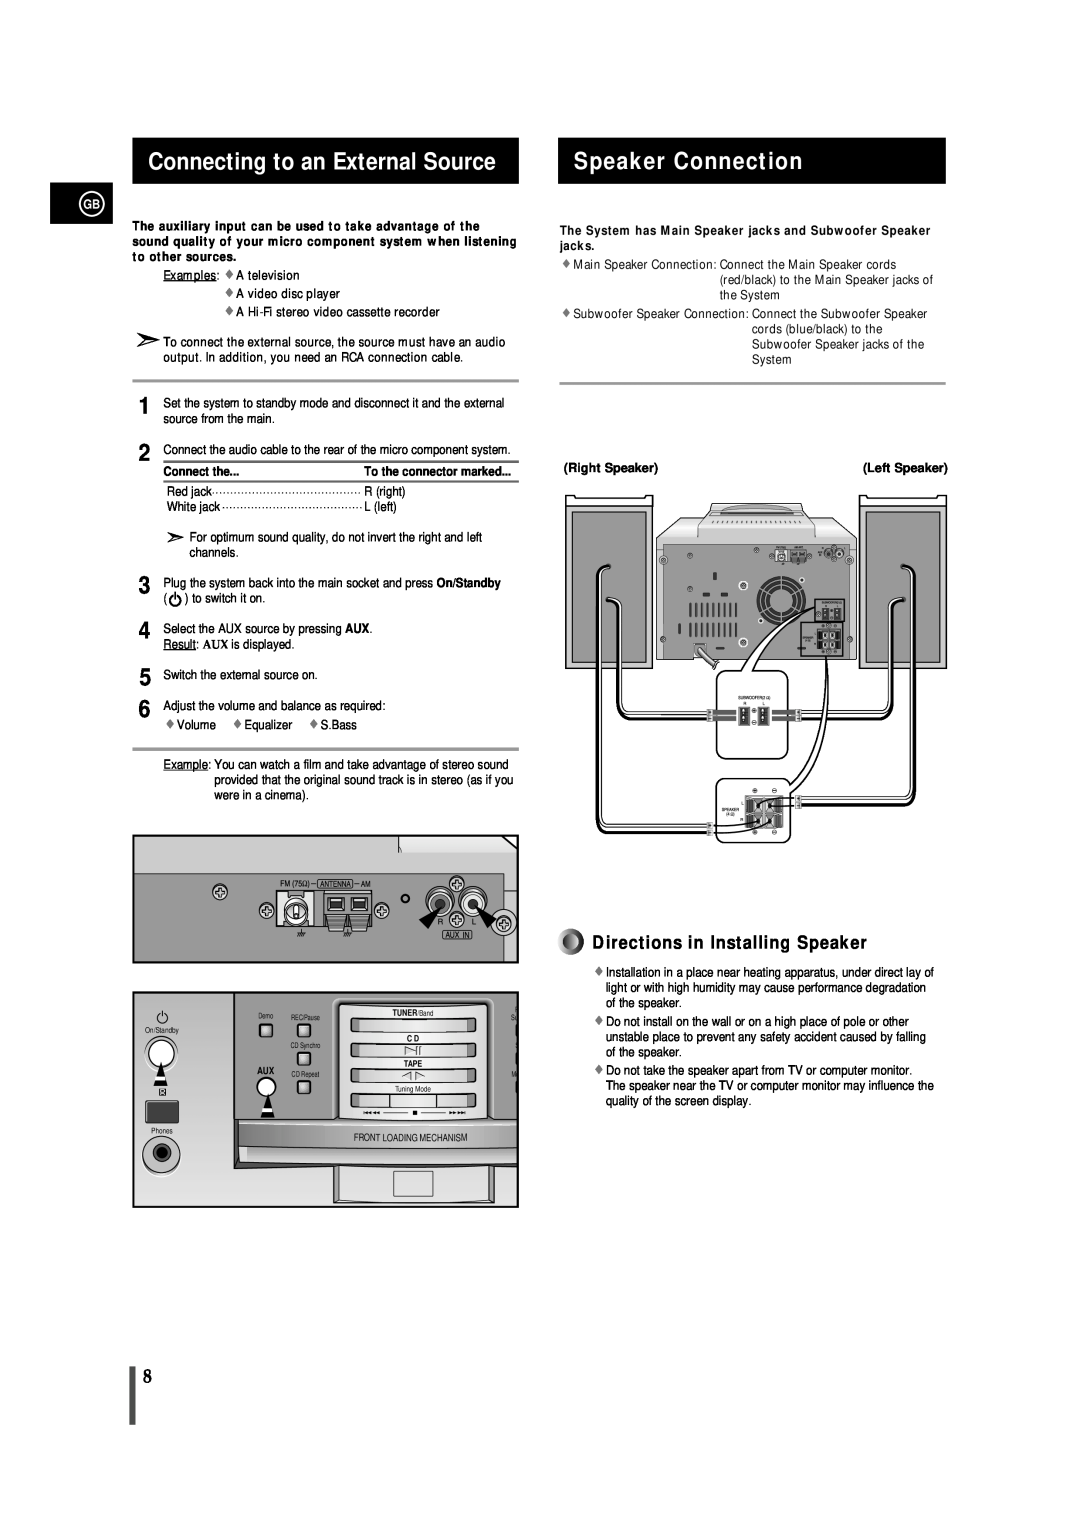 Samsung MM-B9, AH68-01018B Connecting to an External Source, Speaker Connection, Directions in Installing Speaker 